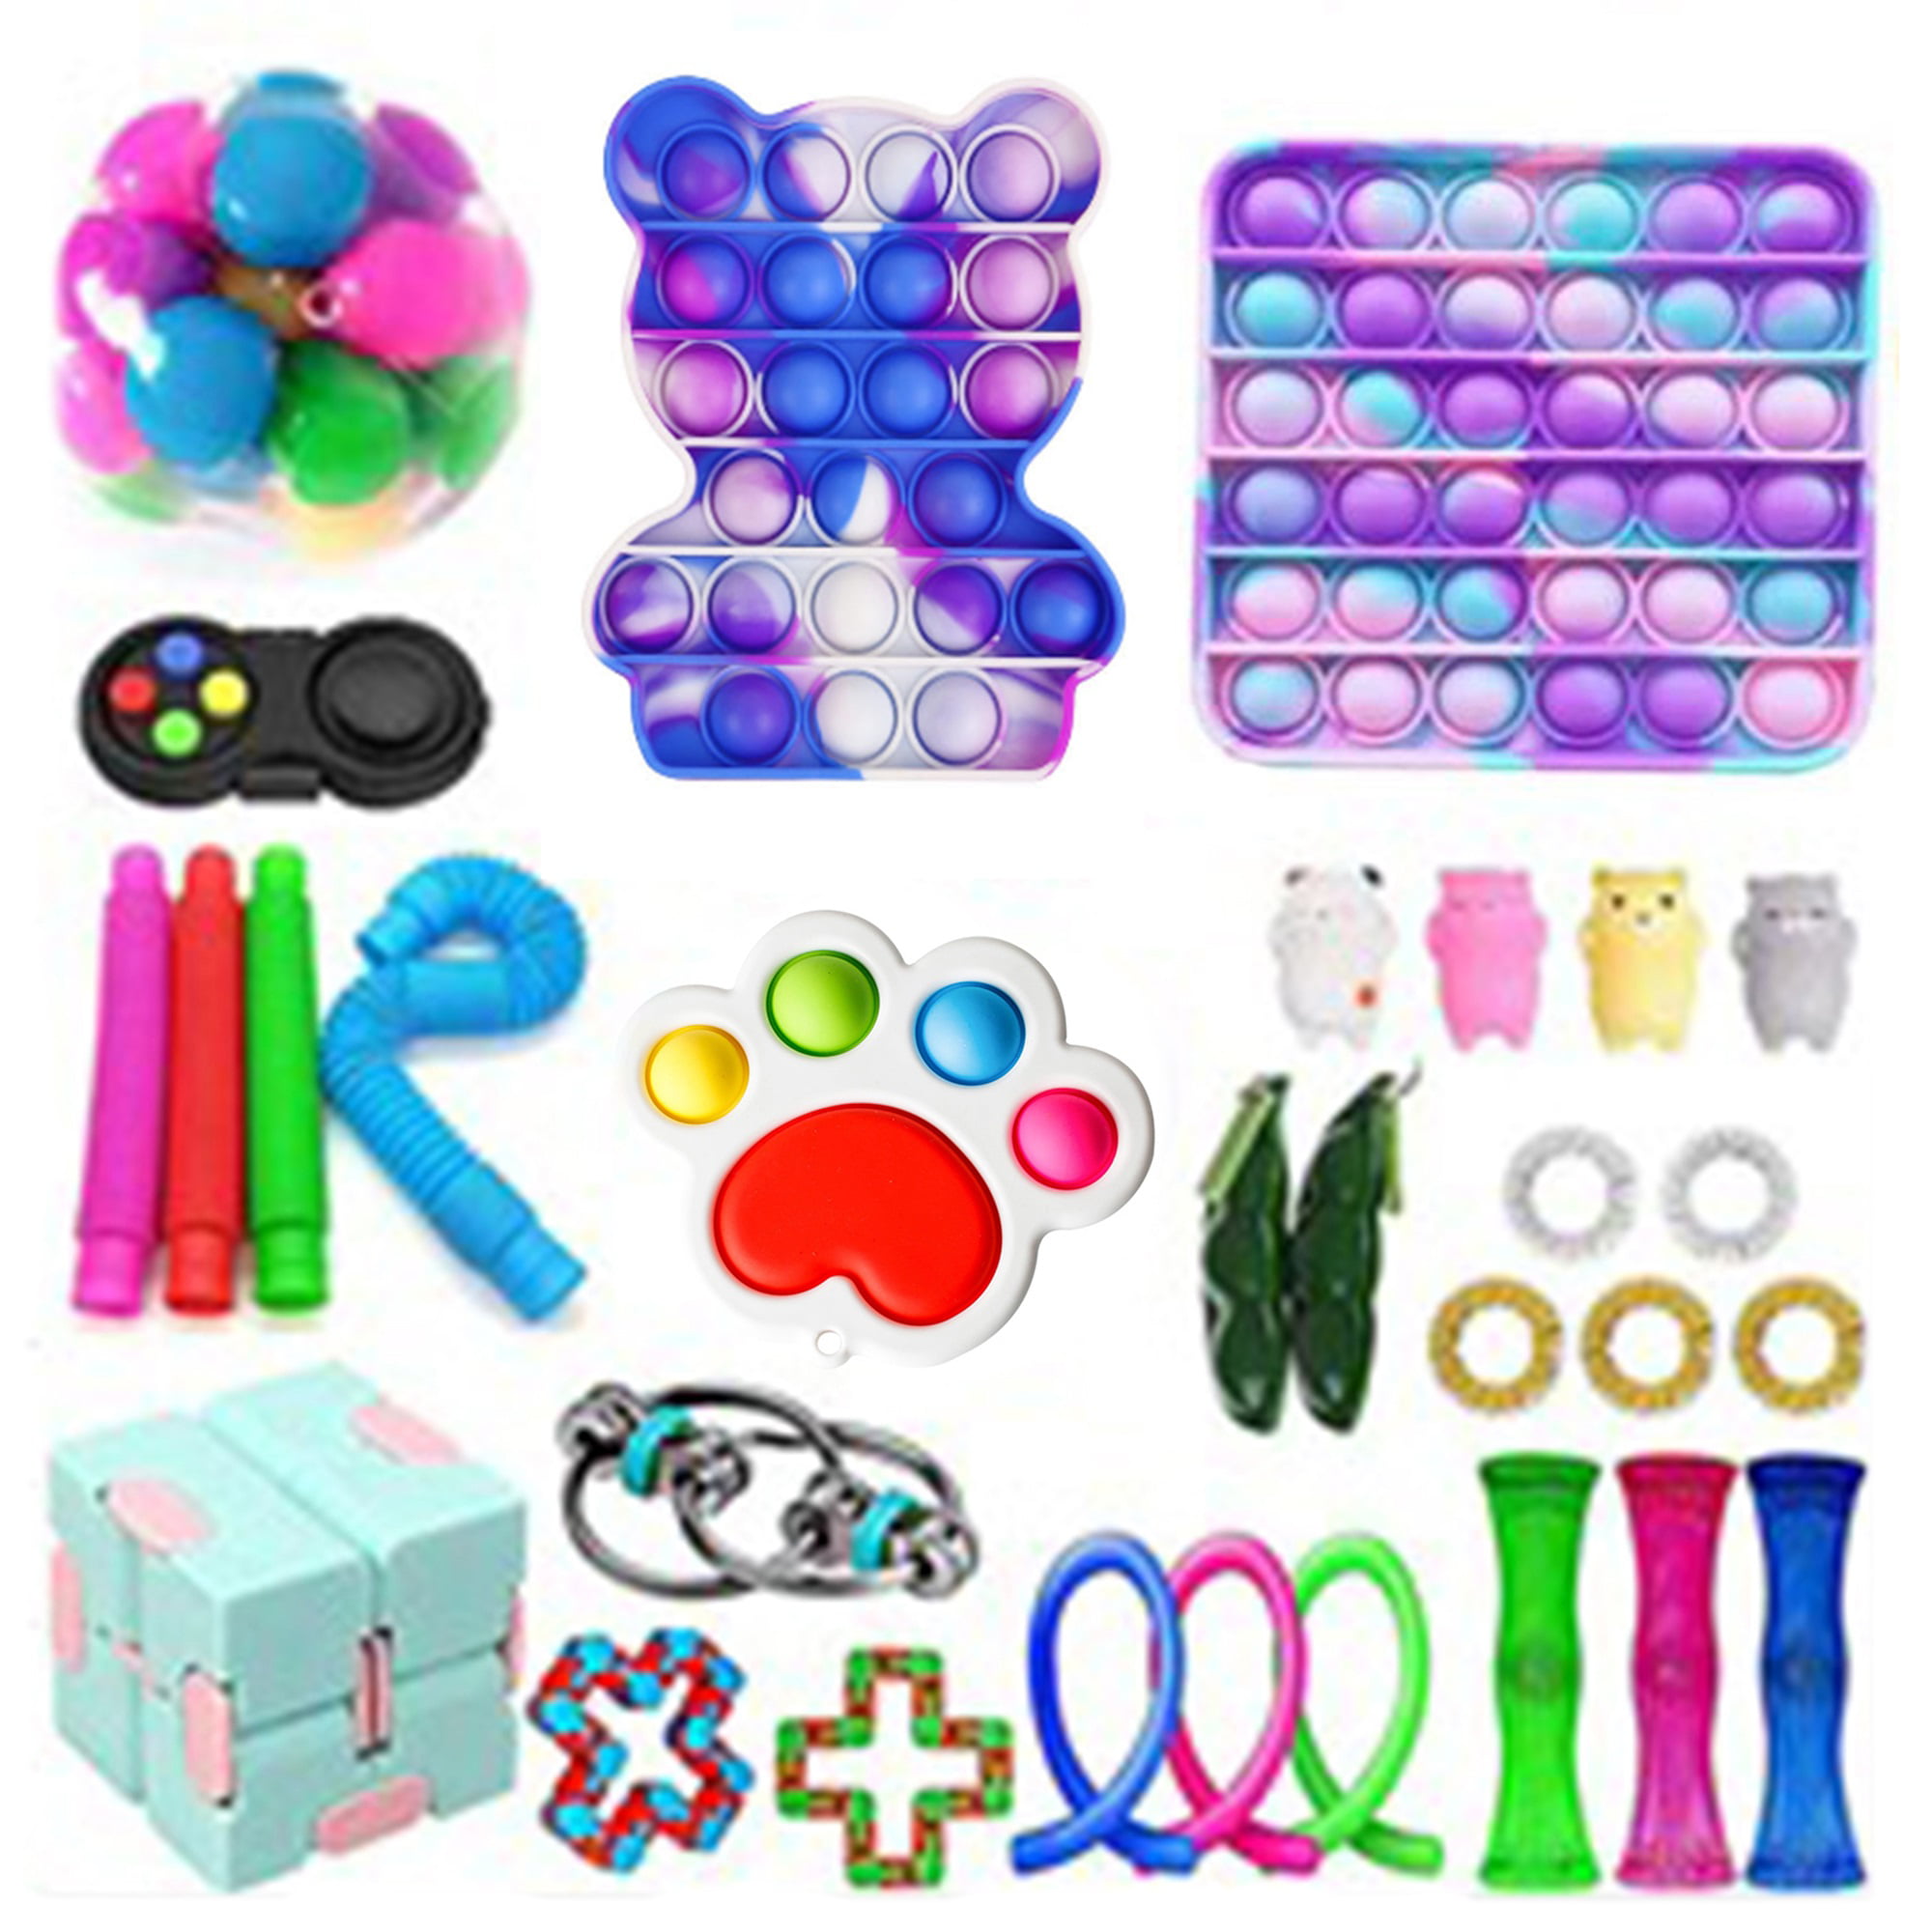 Sensory Fidget Toy for Stress Relief 2 Pack Pink Circle Top Shelf Elements Bubble Poppin Fidget Toy Anxiety Games and Much More. 